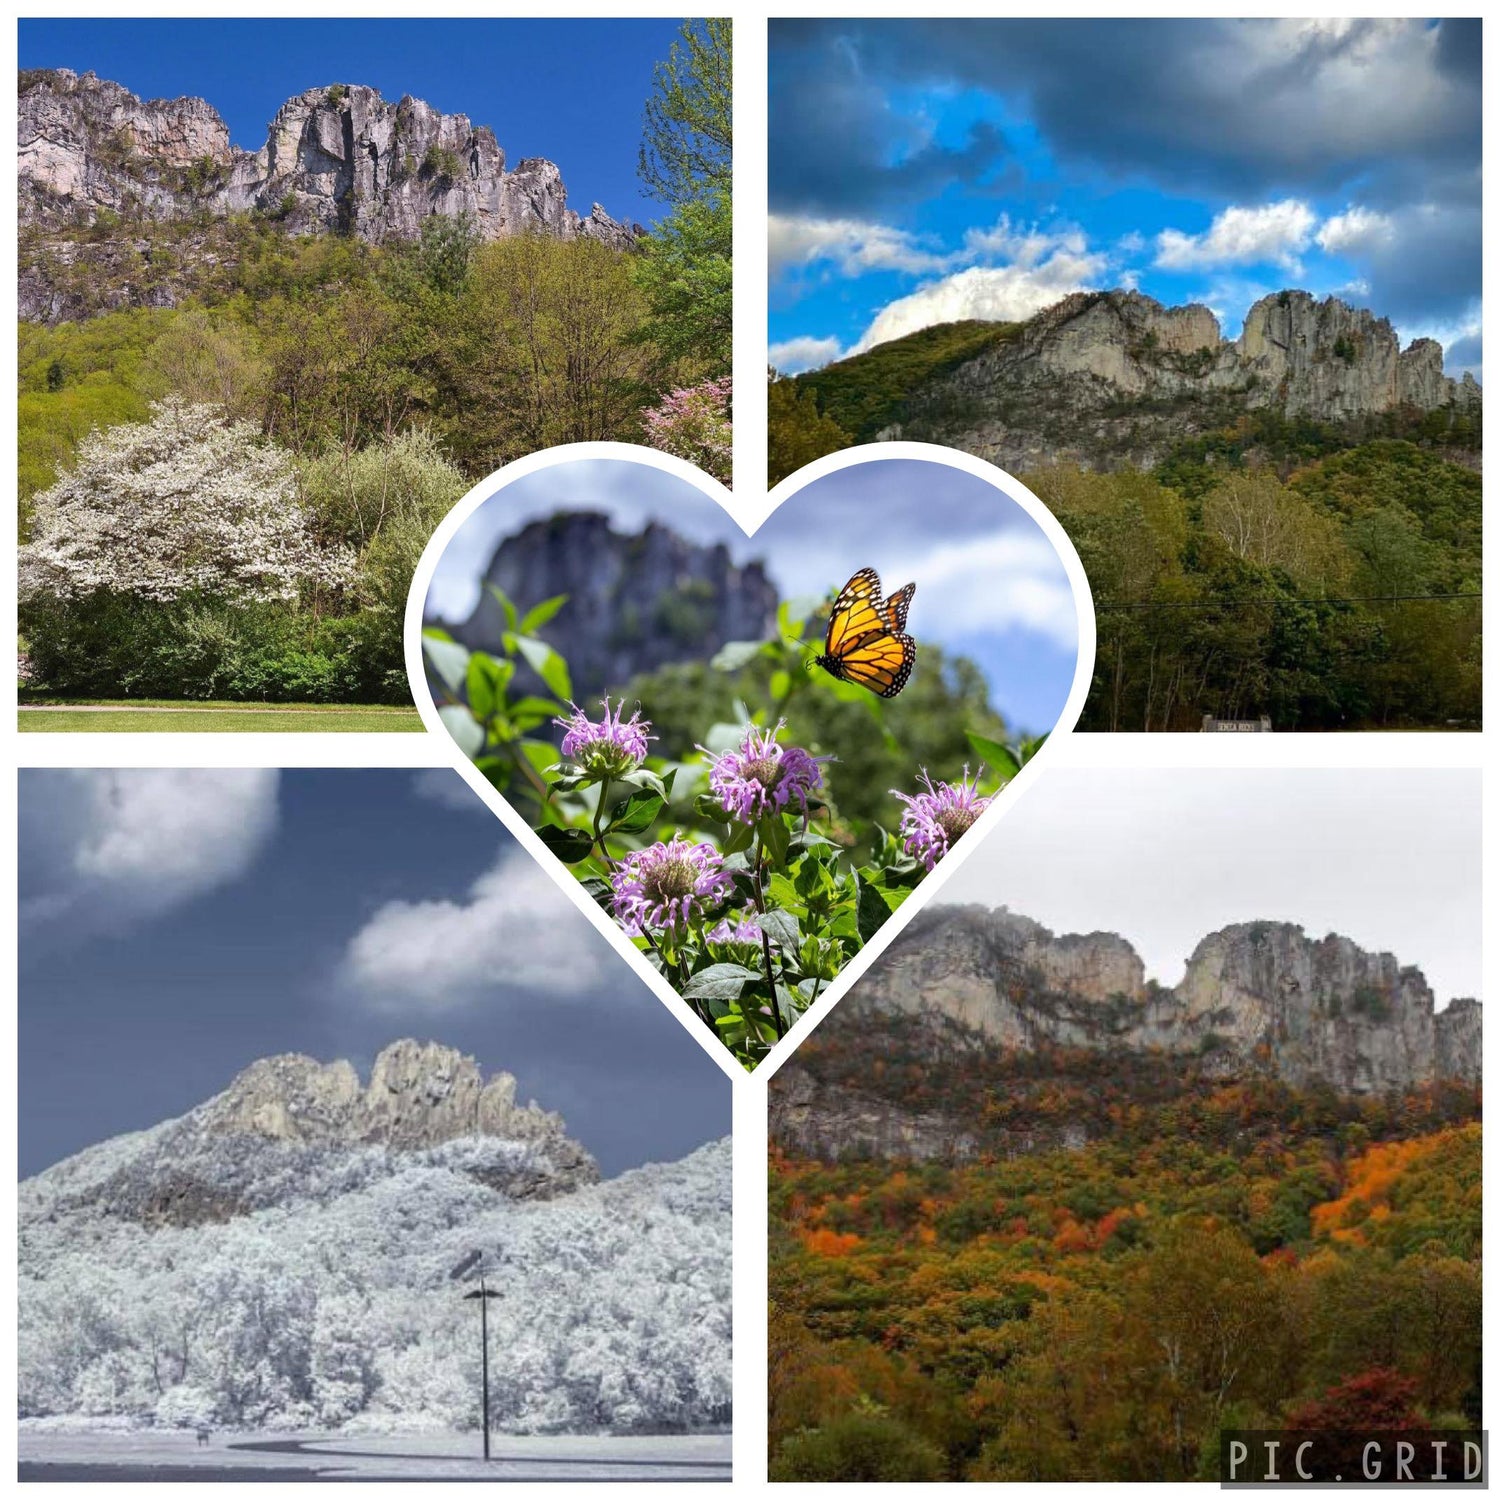 Seneca Rocks WV landmarks explore hiking trails rock climbing and breathtaking best scenery in the area with many scenic attractions enjoy outdoor beauty wild and wonderful west virginia